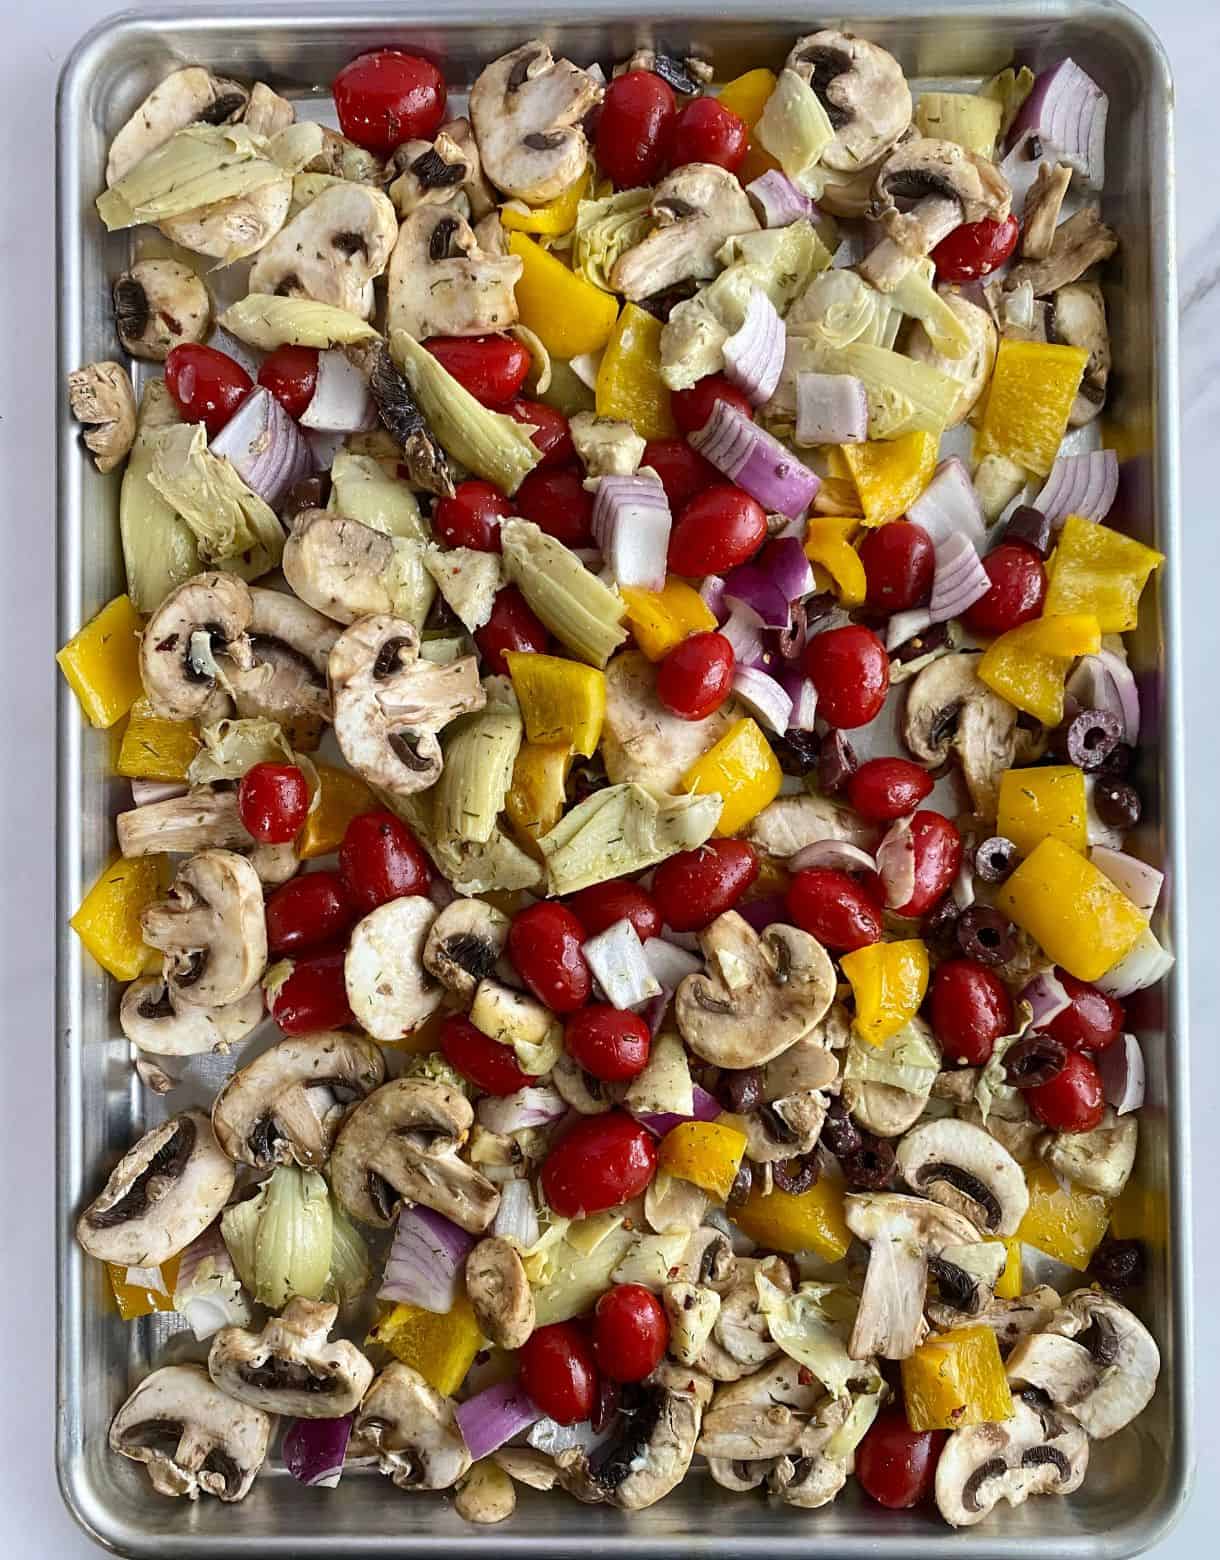 A sheet pan with uncooked Mediterranean Roasted Vegetables.